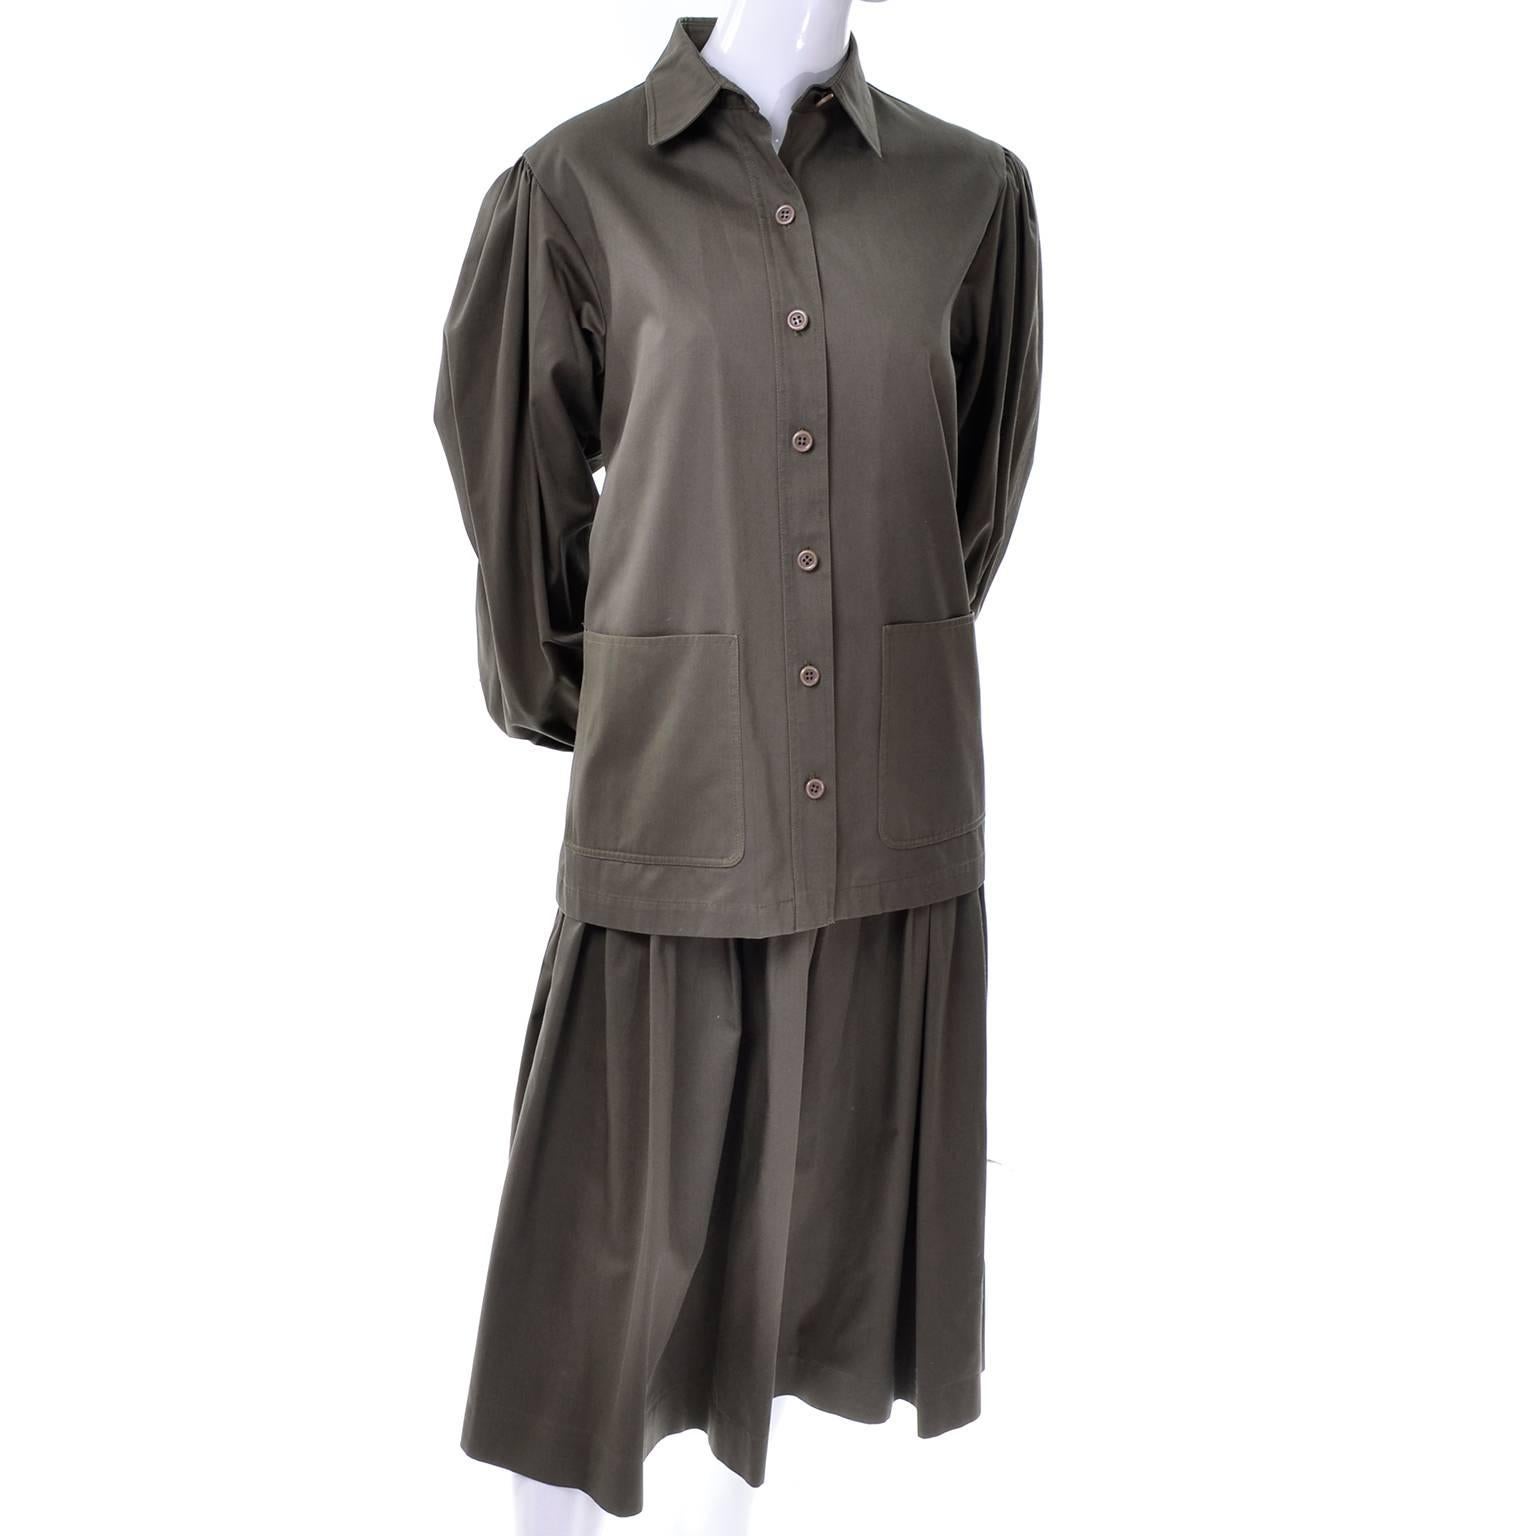 This Yves Saint Laurent vintage 2 piece outfit includes a skirt and a shirt that is cut like a jacket with front pockets.  This khaki olive green 2 piece heavy cotton suit is in excellent condition and the top has the I Magnin label as well.  The